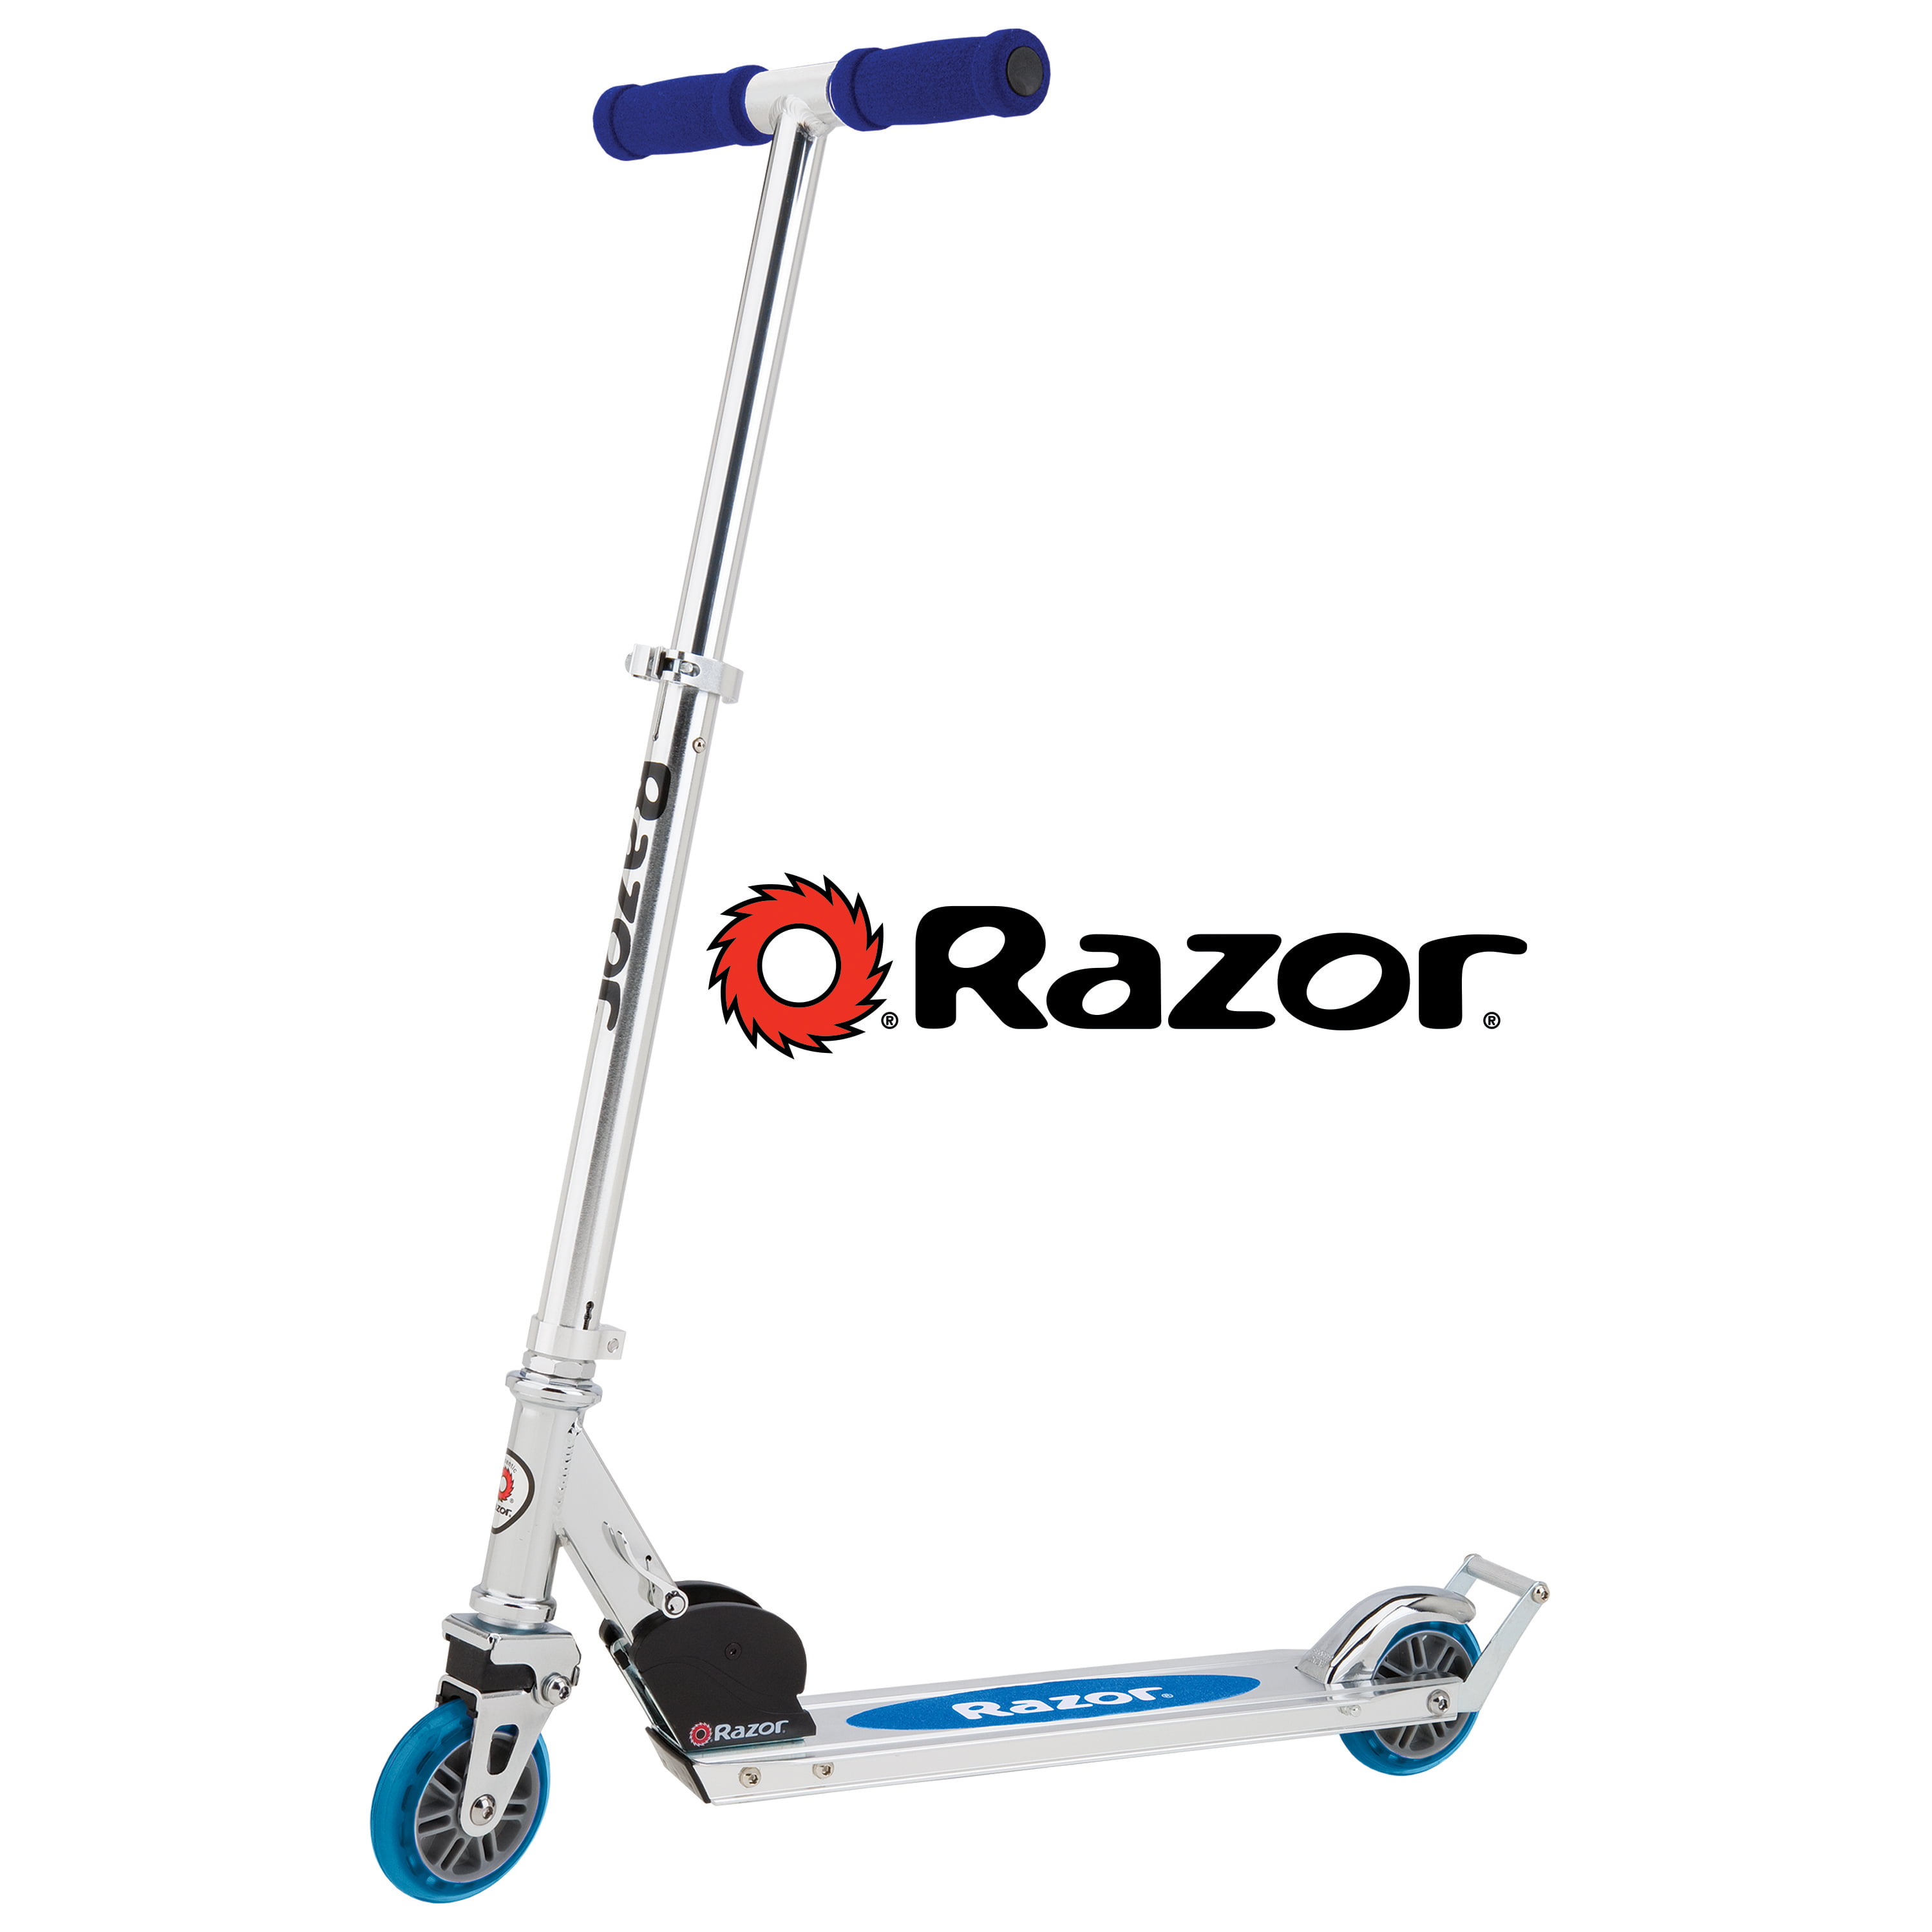 Razor Scooters Scooter Feature Comparison Chart